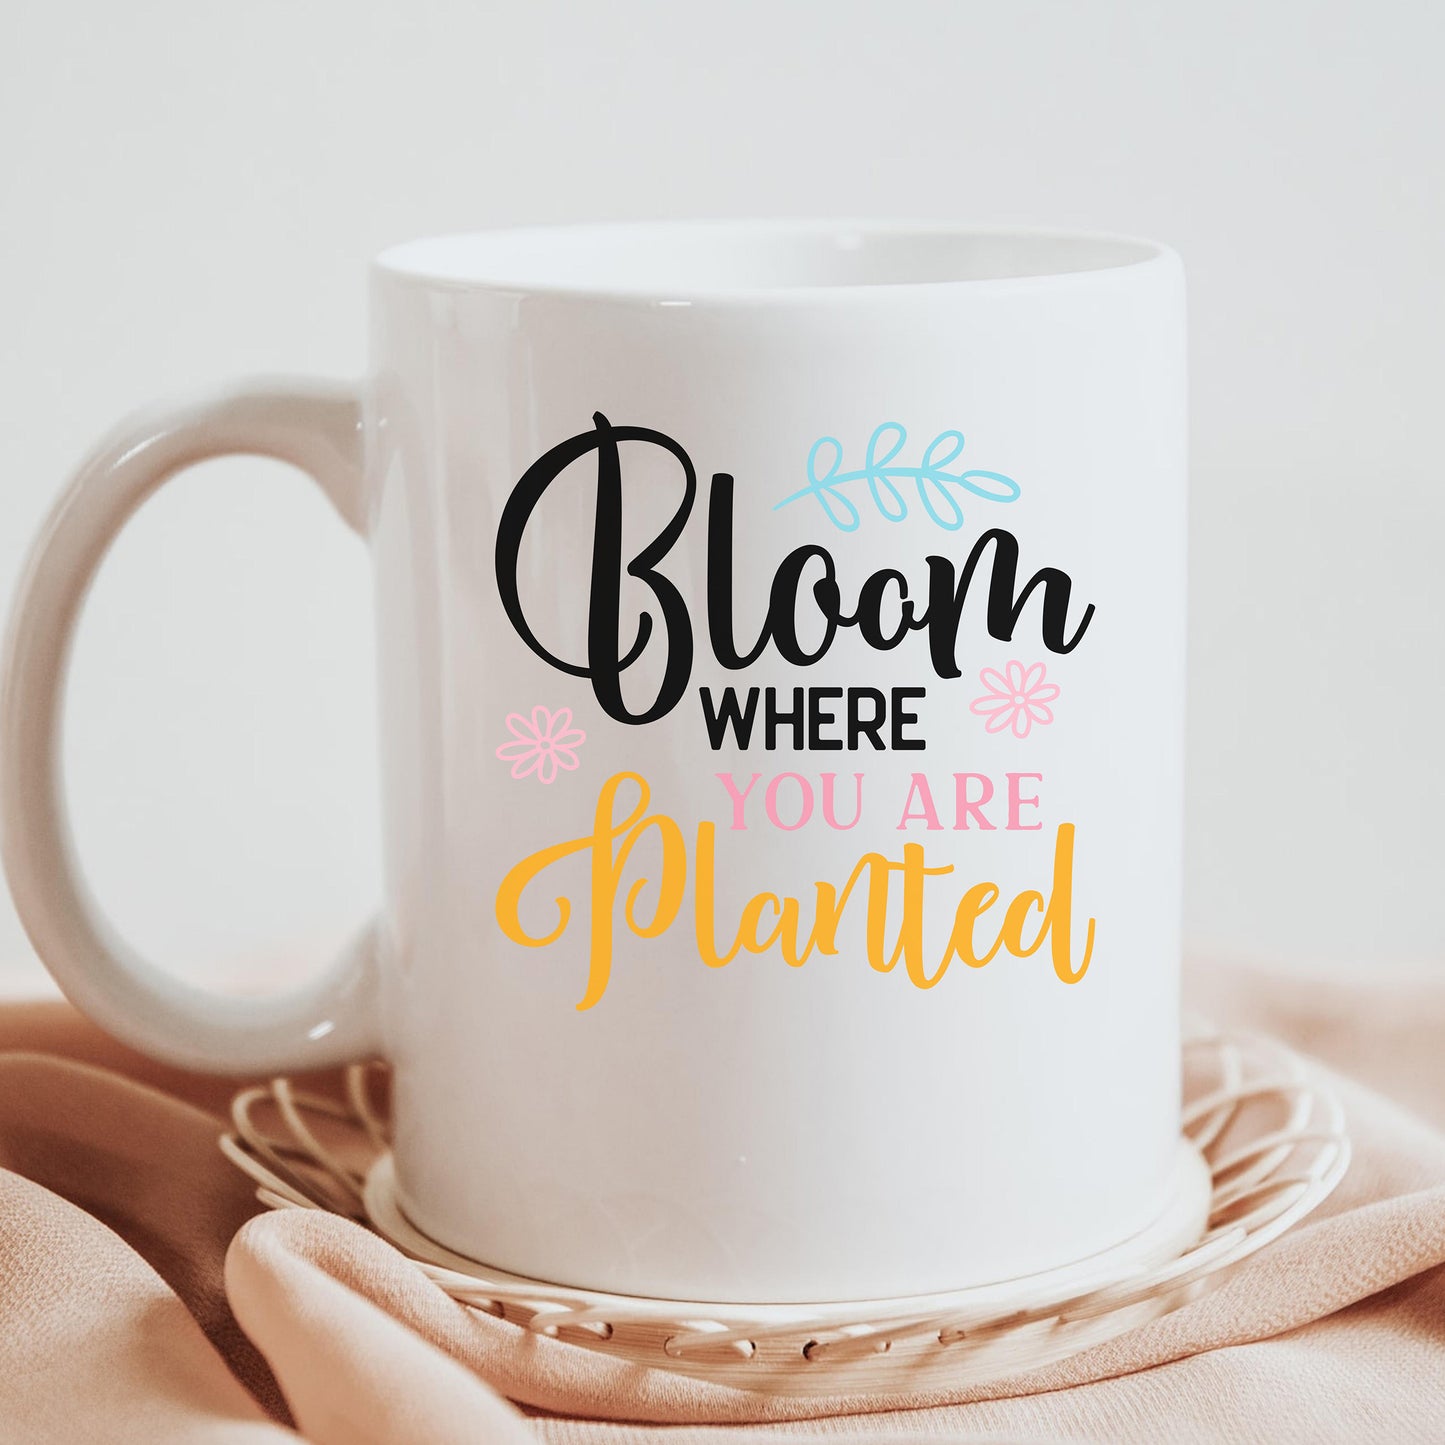 "Bloom Where You Are Planted" Graphic